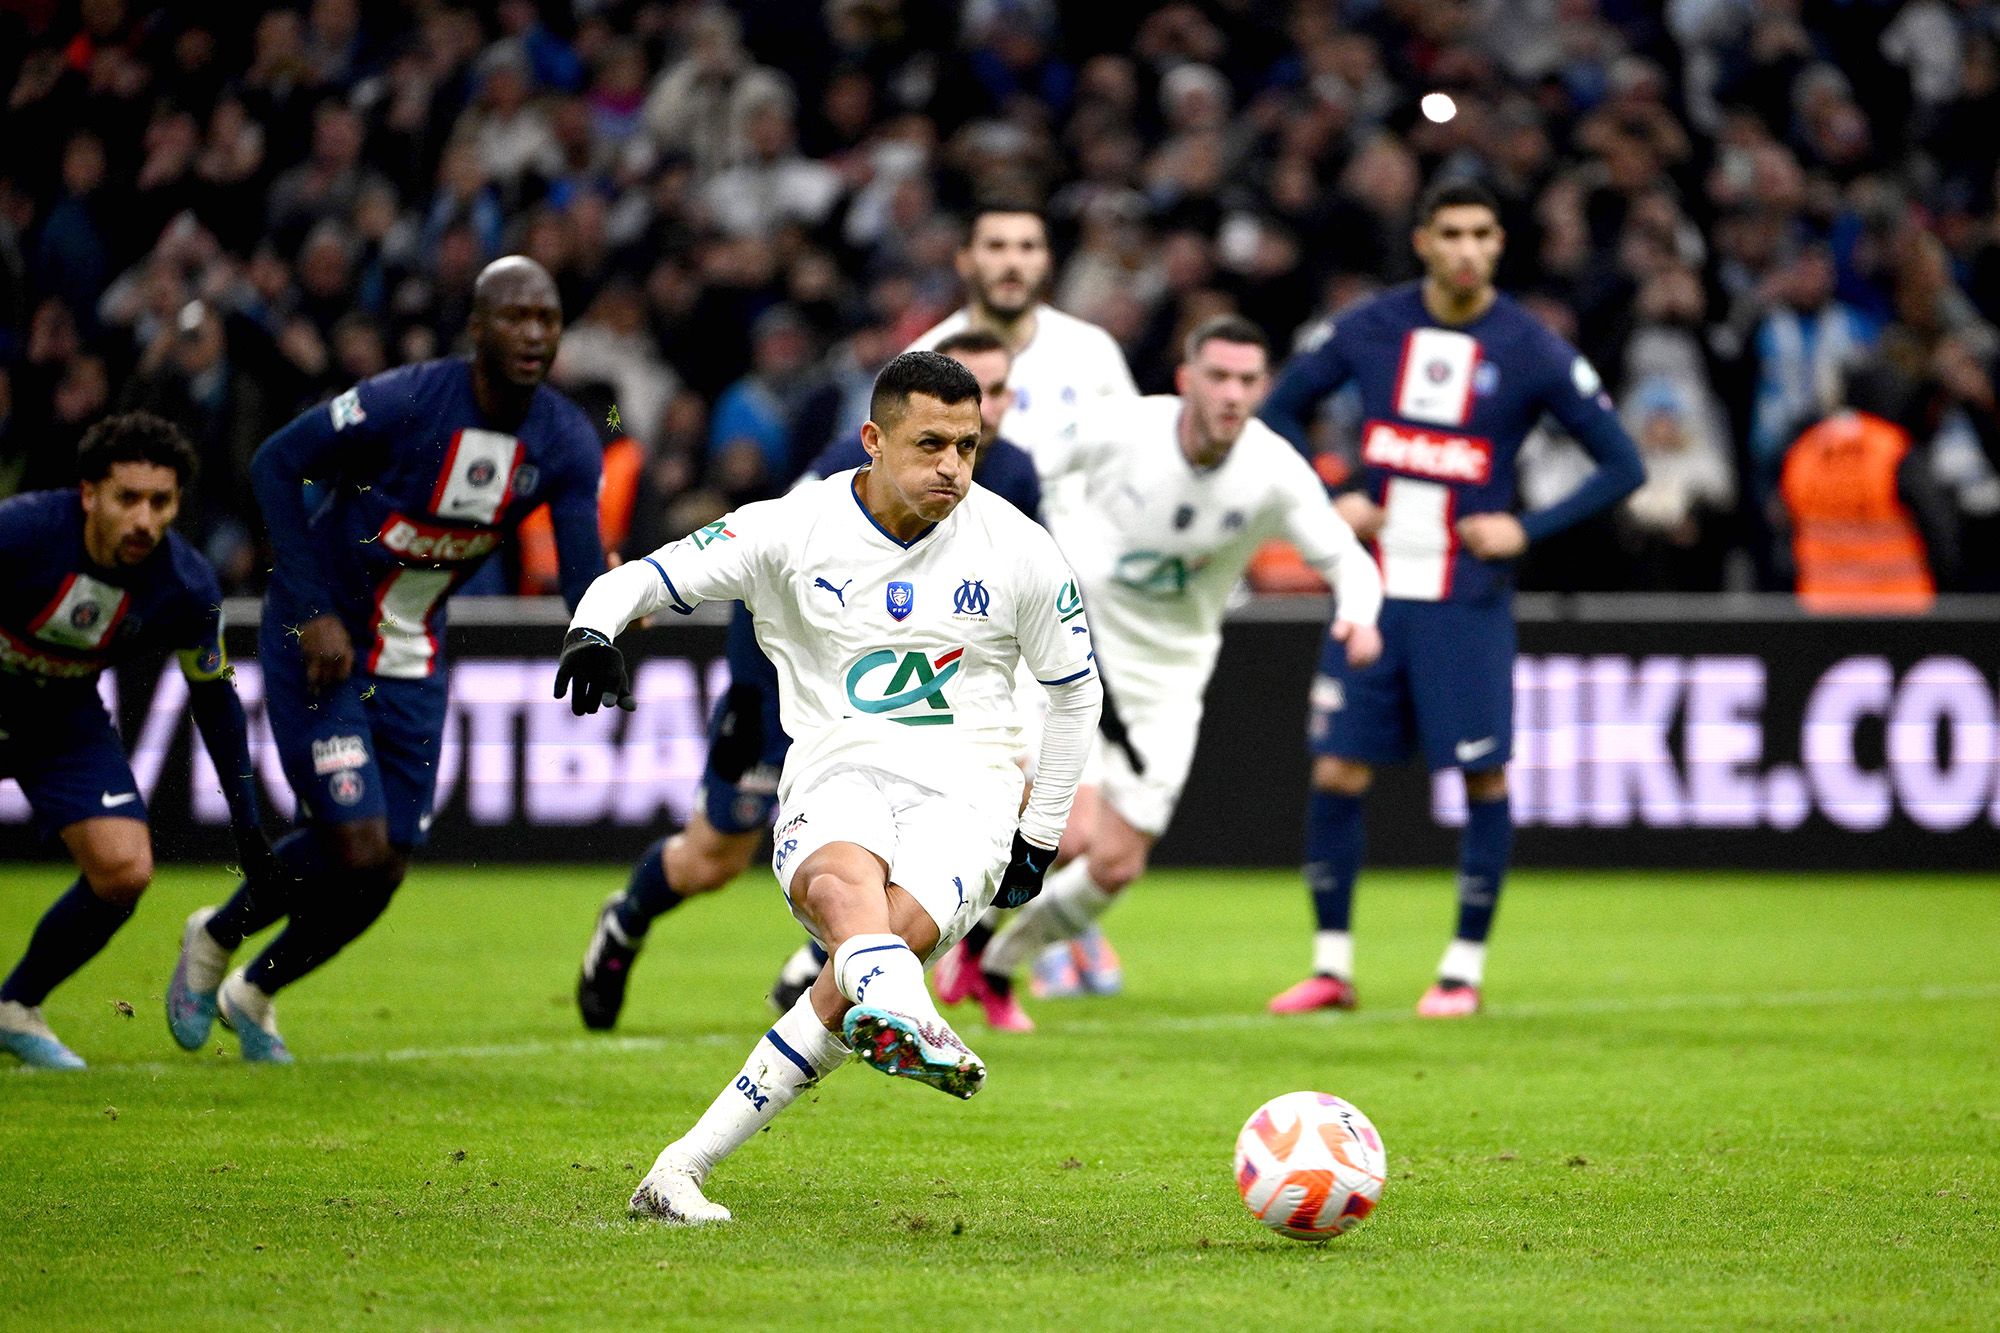 French First League Soccer match, Olympique Marseille vs Paris